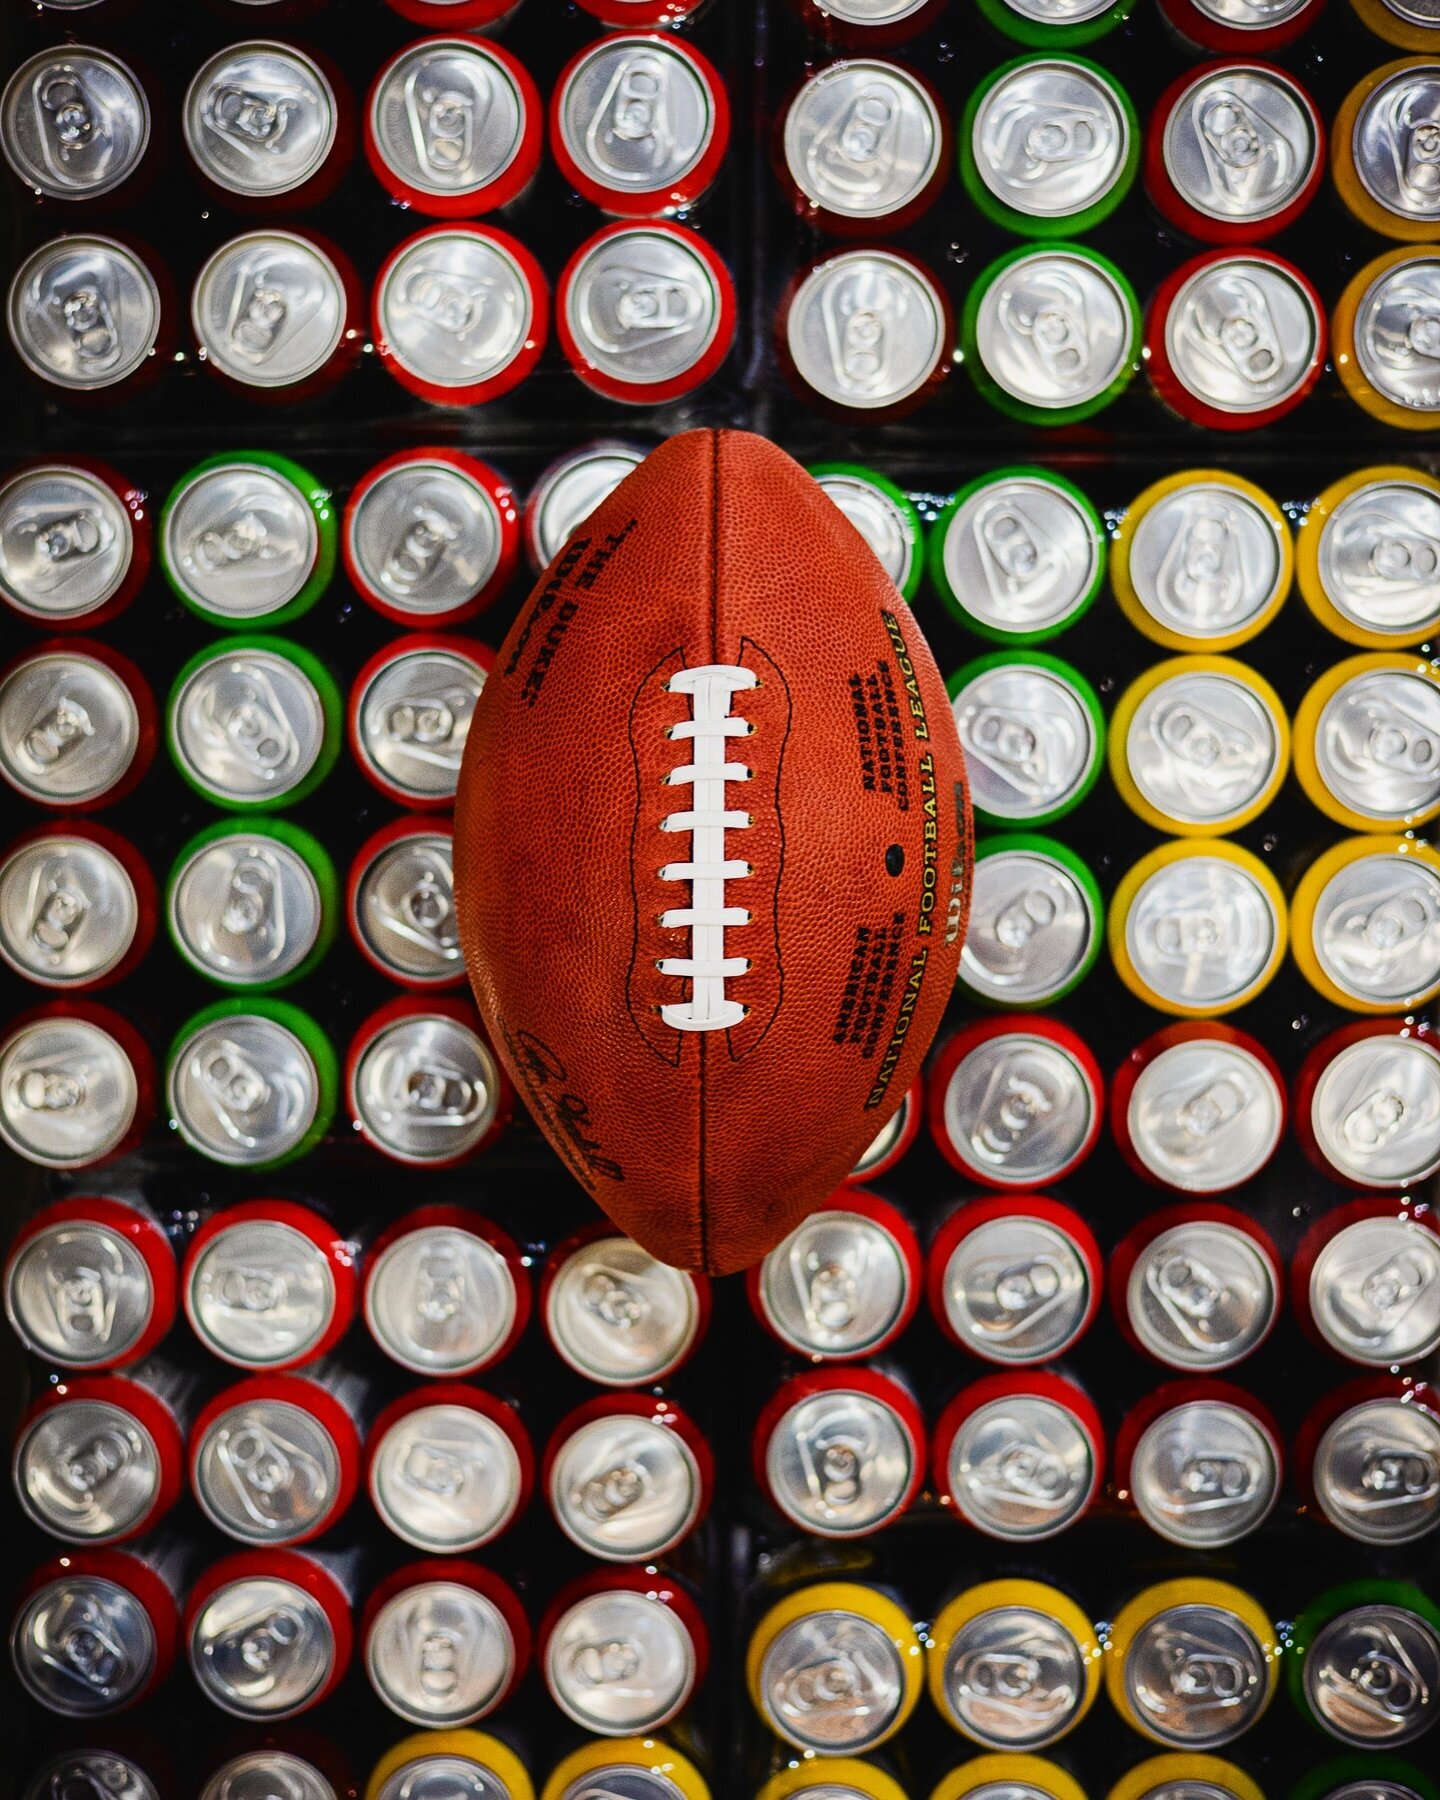 Are YOU ready for Game Day THIS Sunday? 🏈 Nothing pairs better with the big game than a local craft beer!

To ensure you are game day ready, we&rsquo;re offering 💥$5 OFF💥 any of our Variety or Sampler Cases ― available for pick-up at the brewery o